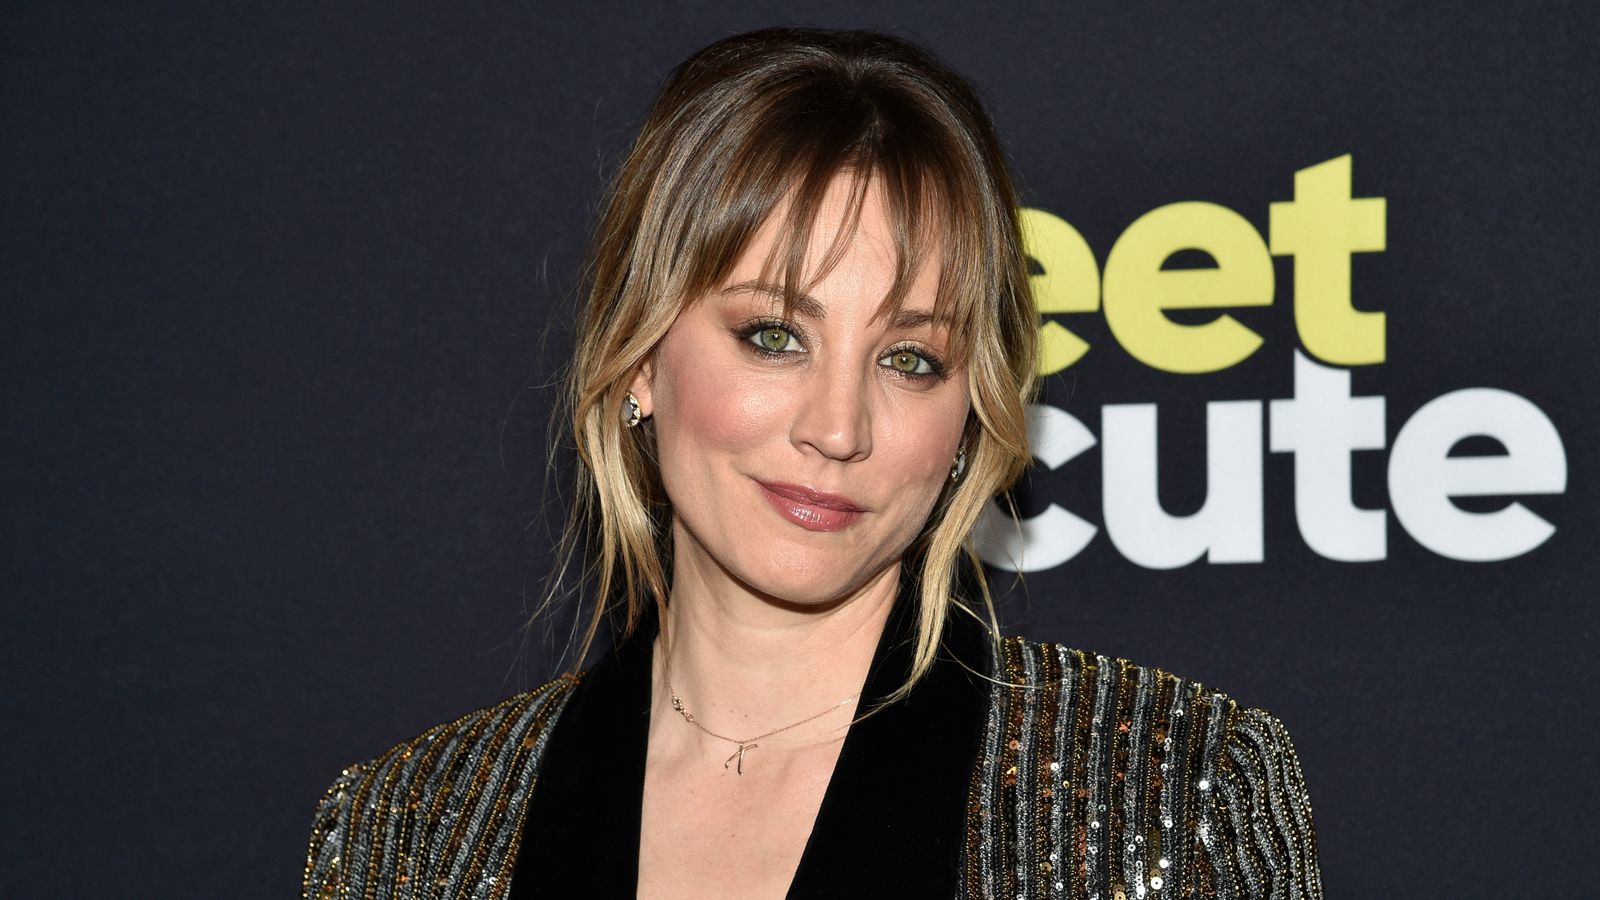 Actress Kaley Cuoco 'beyond blessed and over the moon' as she announces she is pregnant with first child